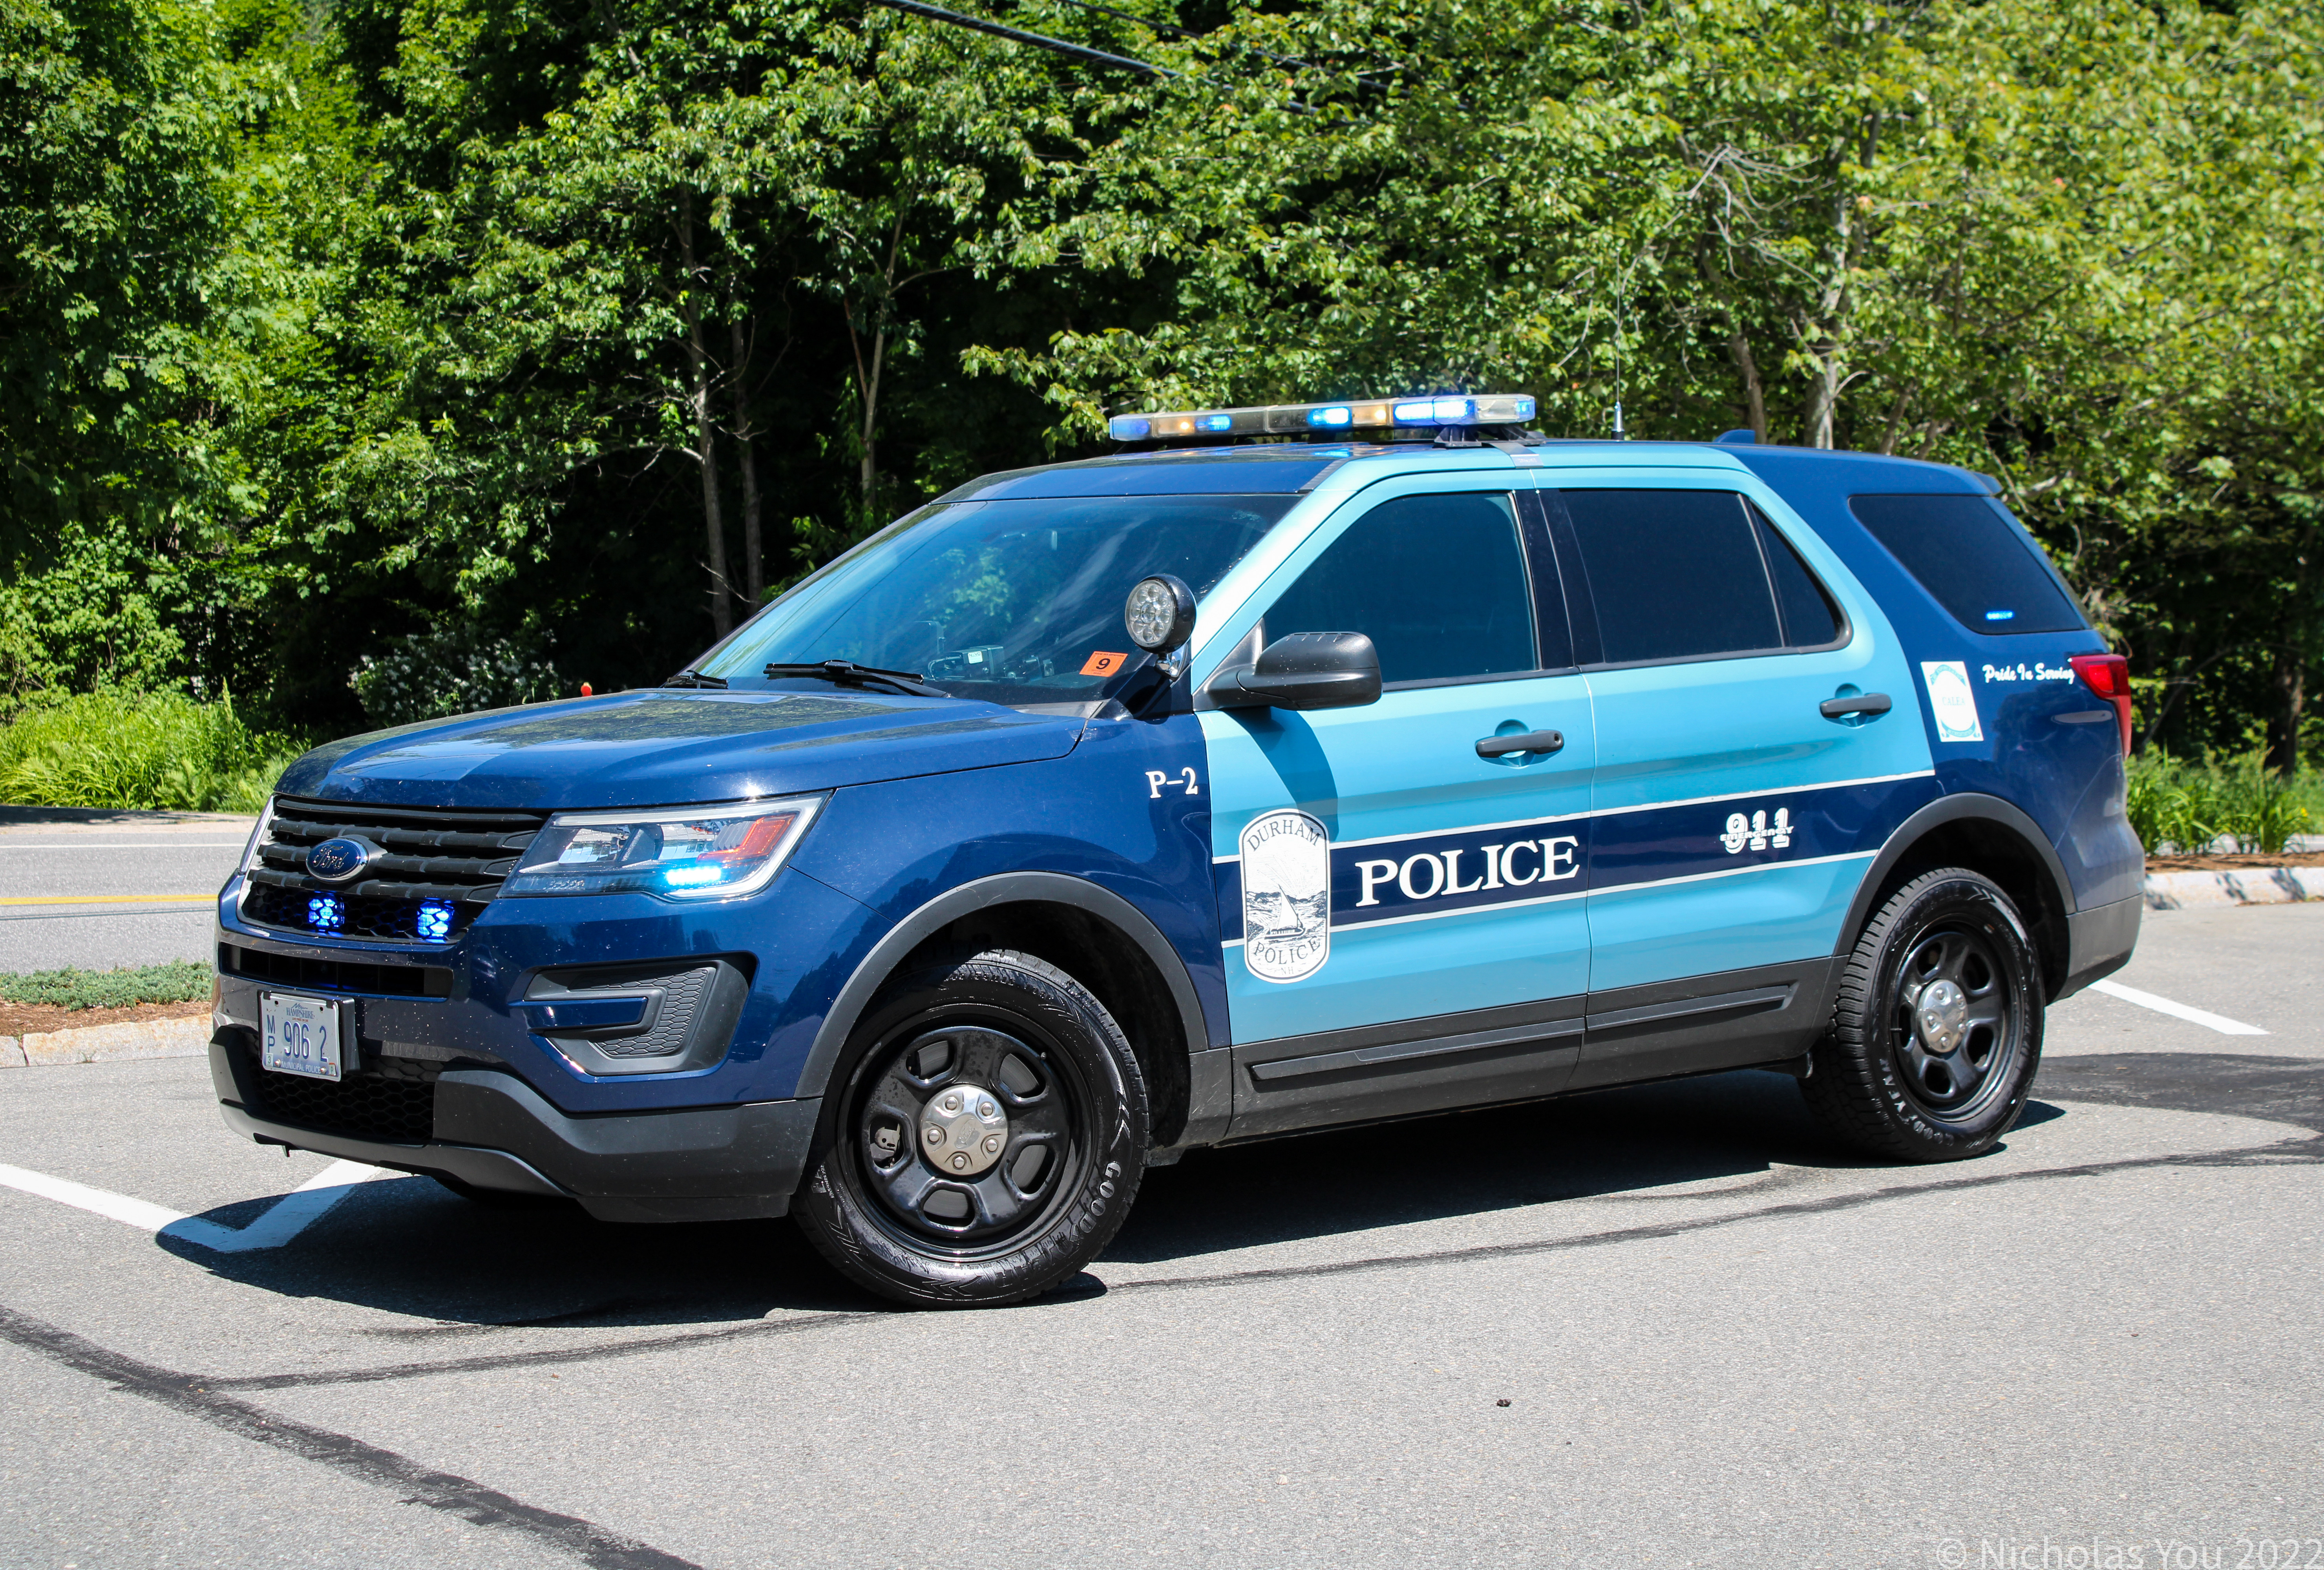 A photo  of Durham Police
            Cruiser P-2, a 2016-2019 Ford Police Interceptor Utility             taken by Nicholas You